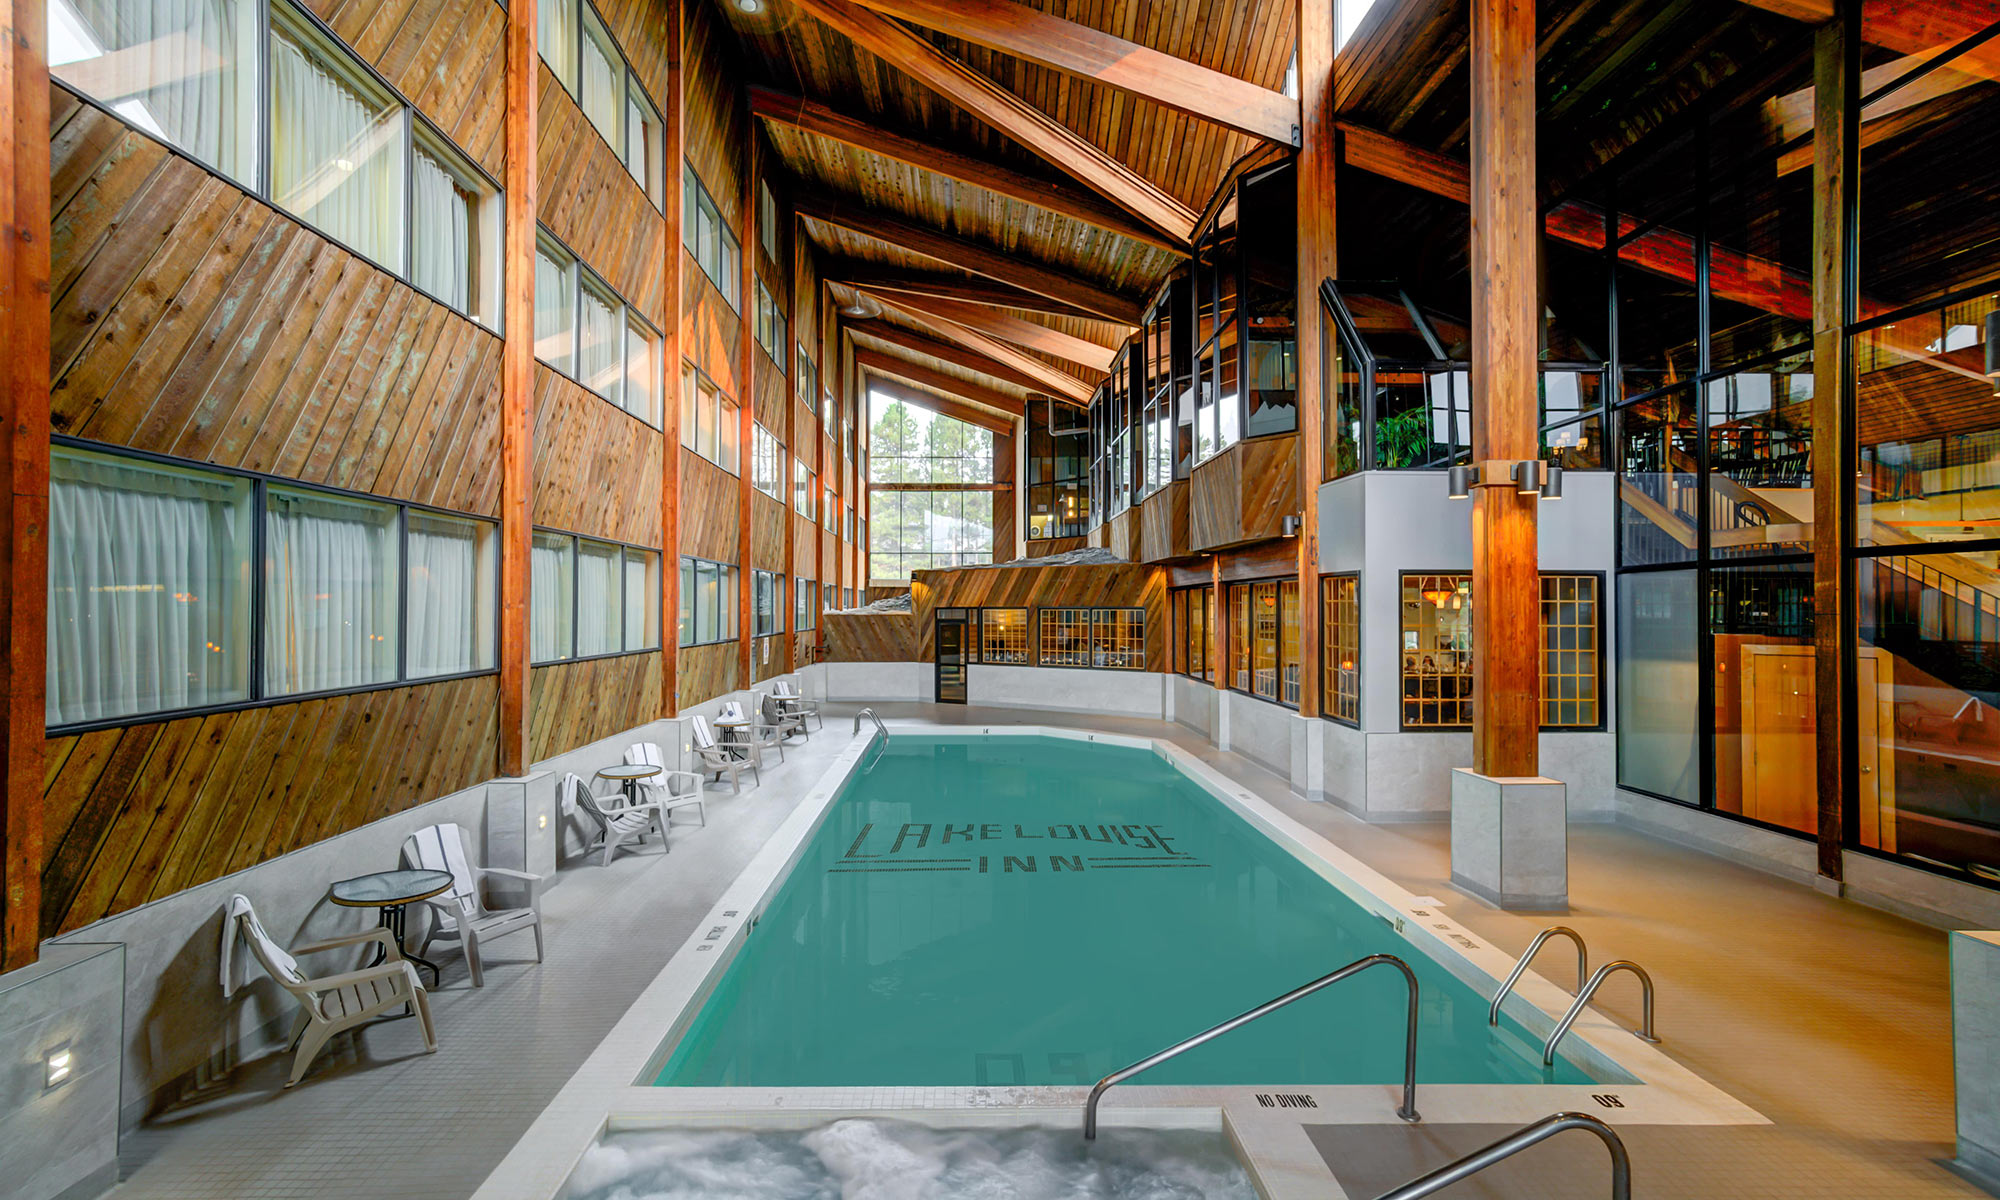 Interior Lake Louise Inn pool surrounded by high ceilings and wooden beams